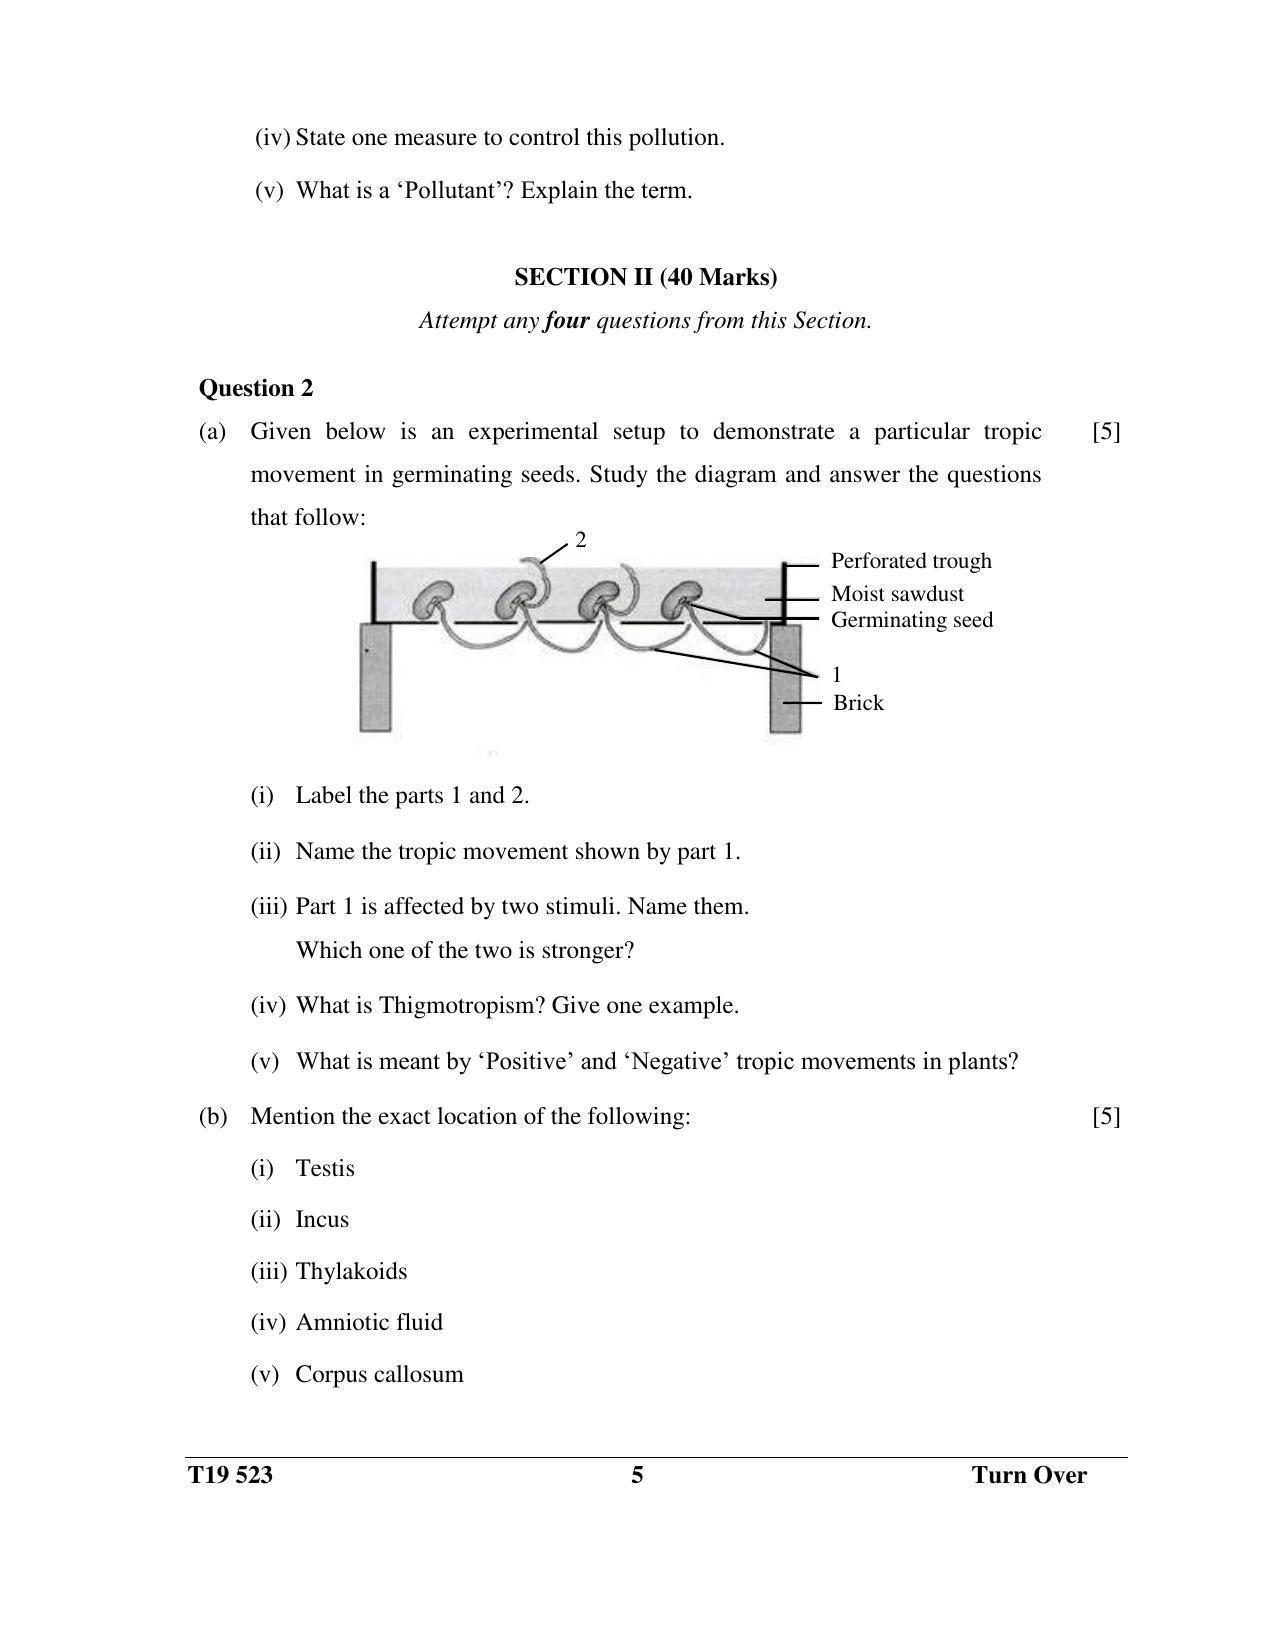 ICSE Class 10 Science Paper 3 (Biology) 2019 Question Paper - Page 5